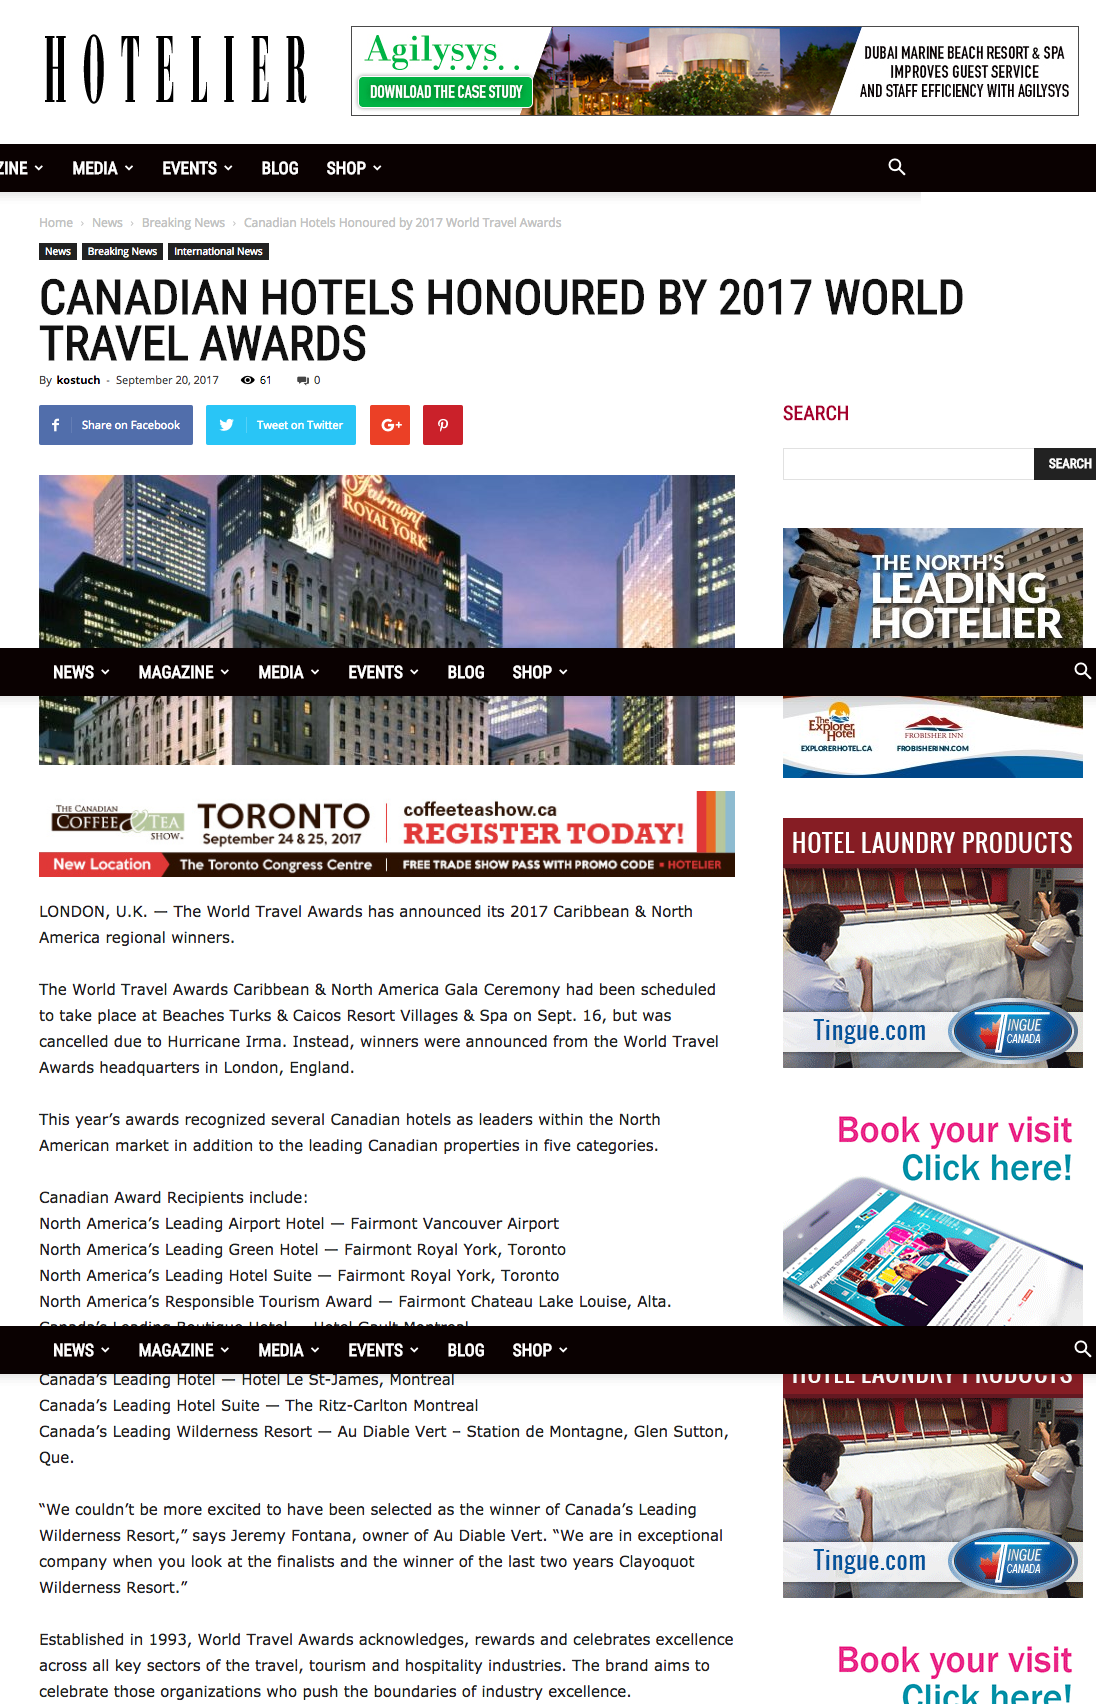 Canadian Hotels honoured by 2017 World Travel Awards